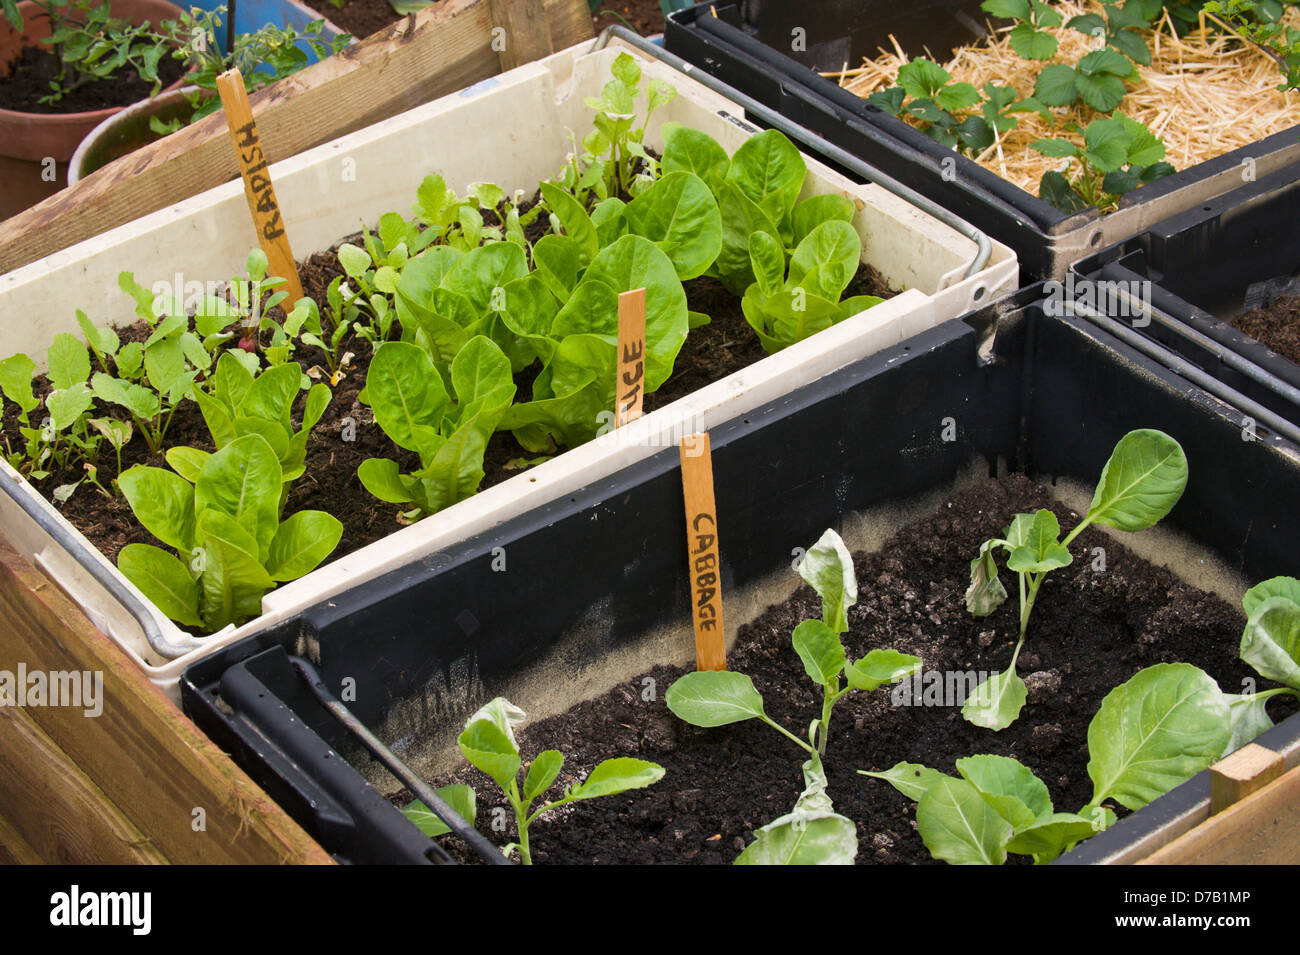 Salad crops growing in containers on allotment display at Exeter Festival of South West Food & Drink Stock Photo